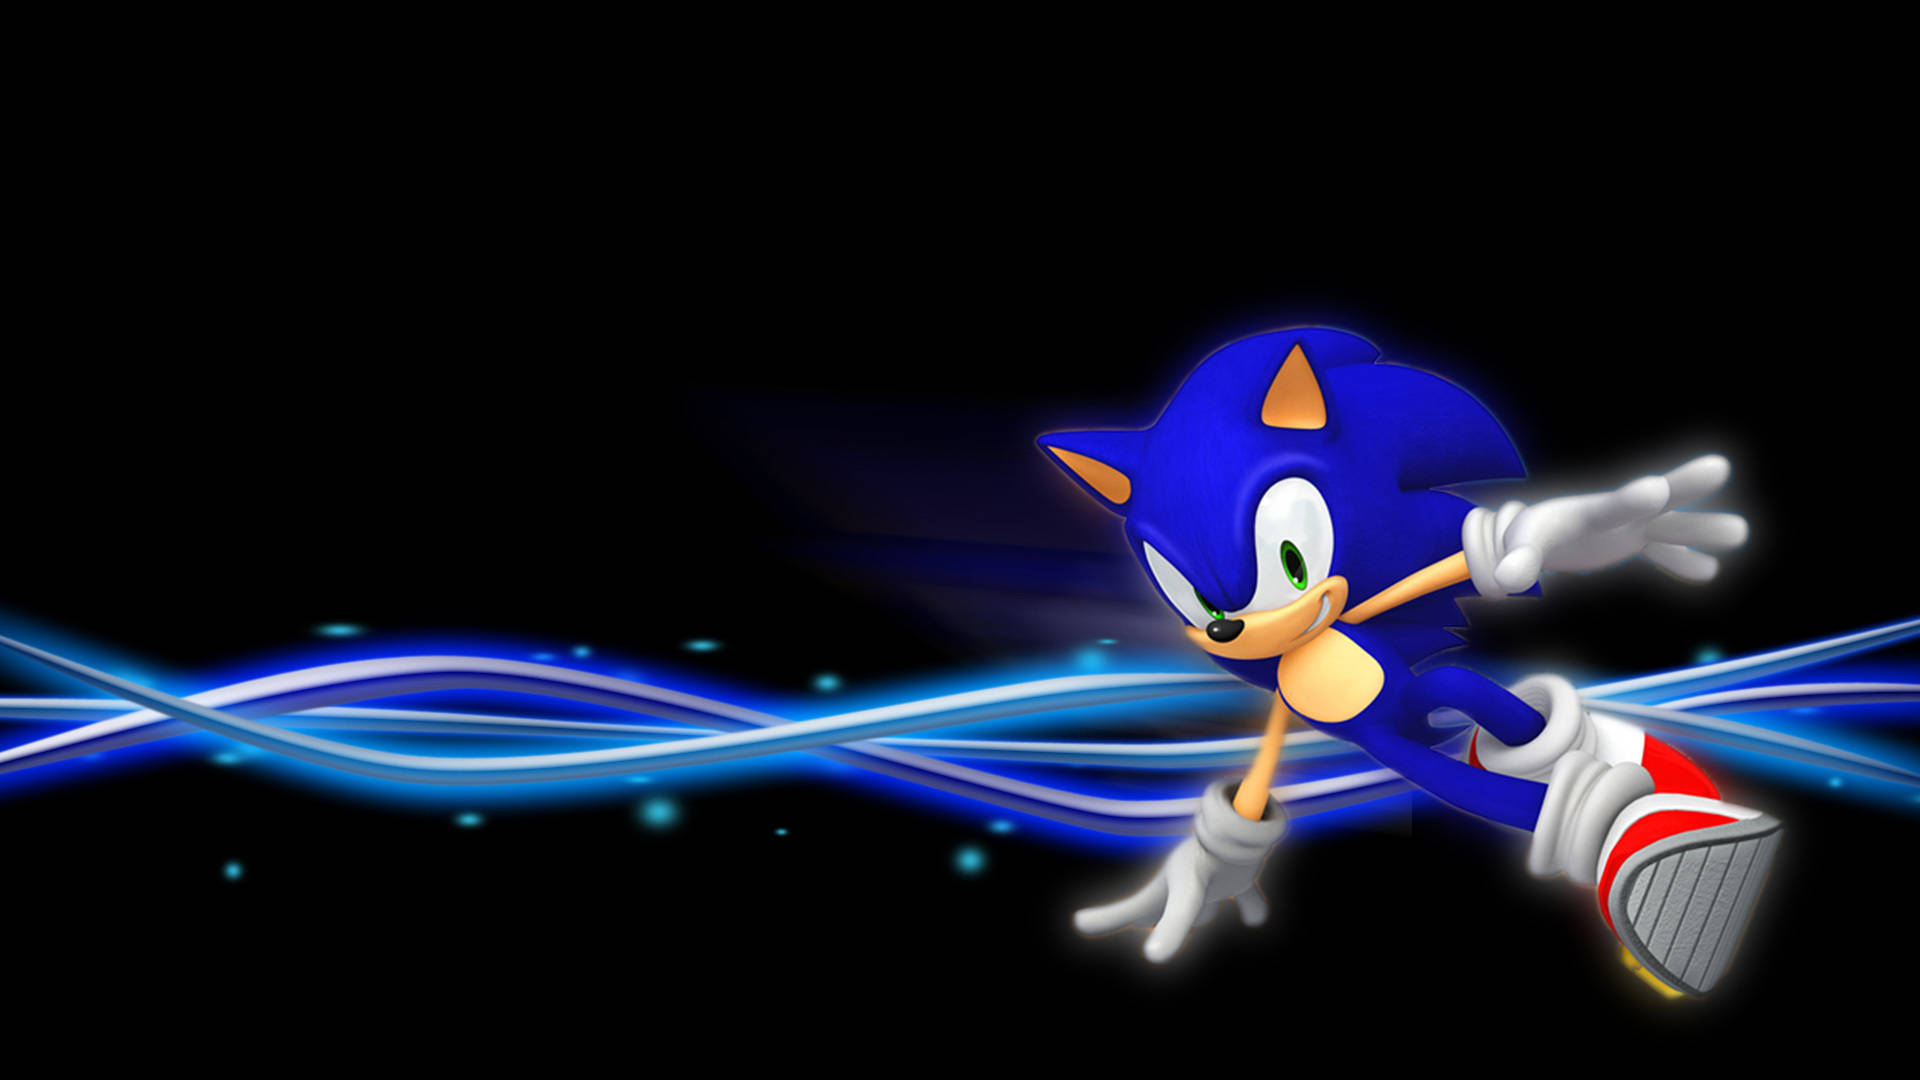 Cool Sonic the hedgehog taking a daring leap Wallpaper